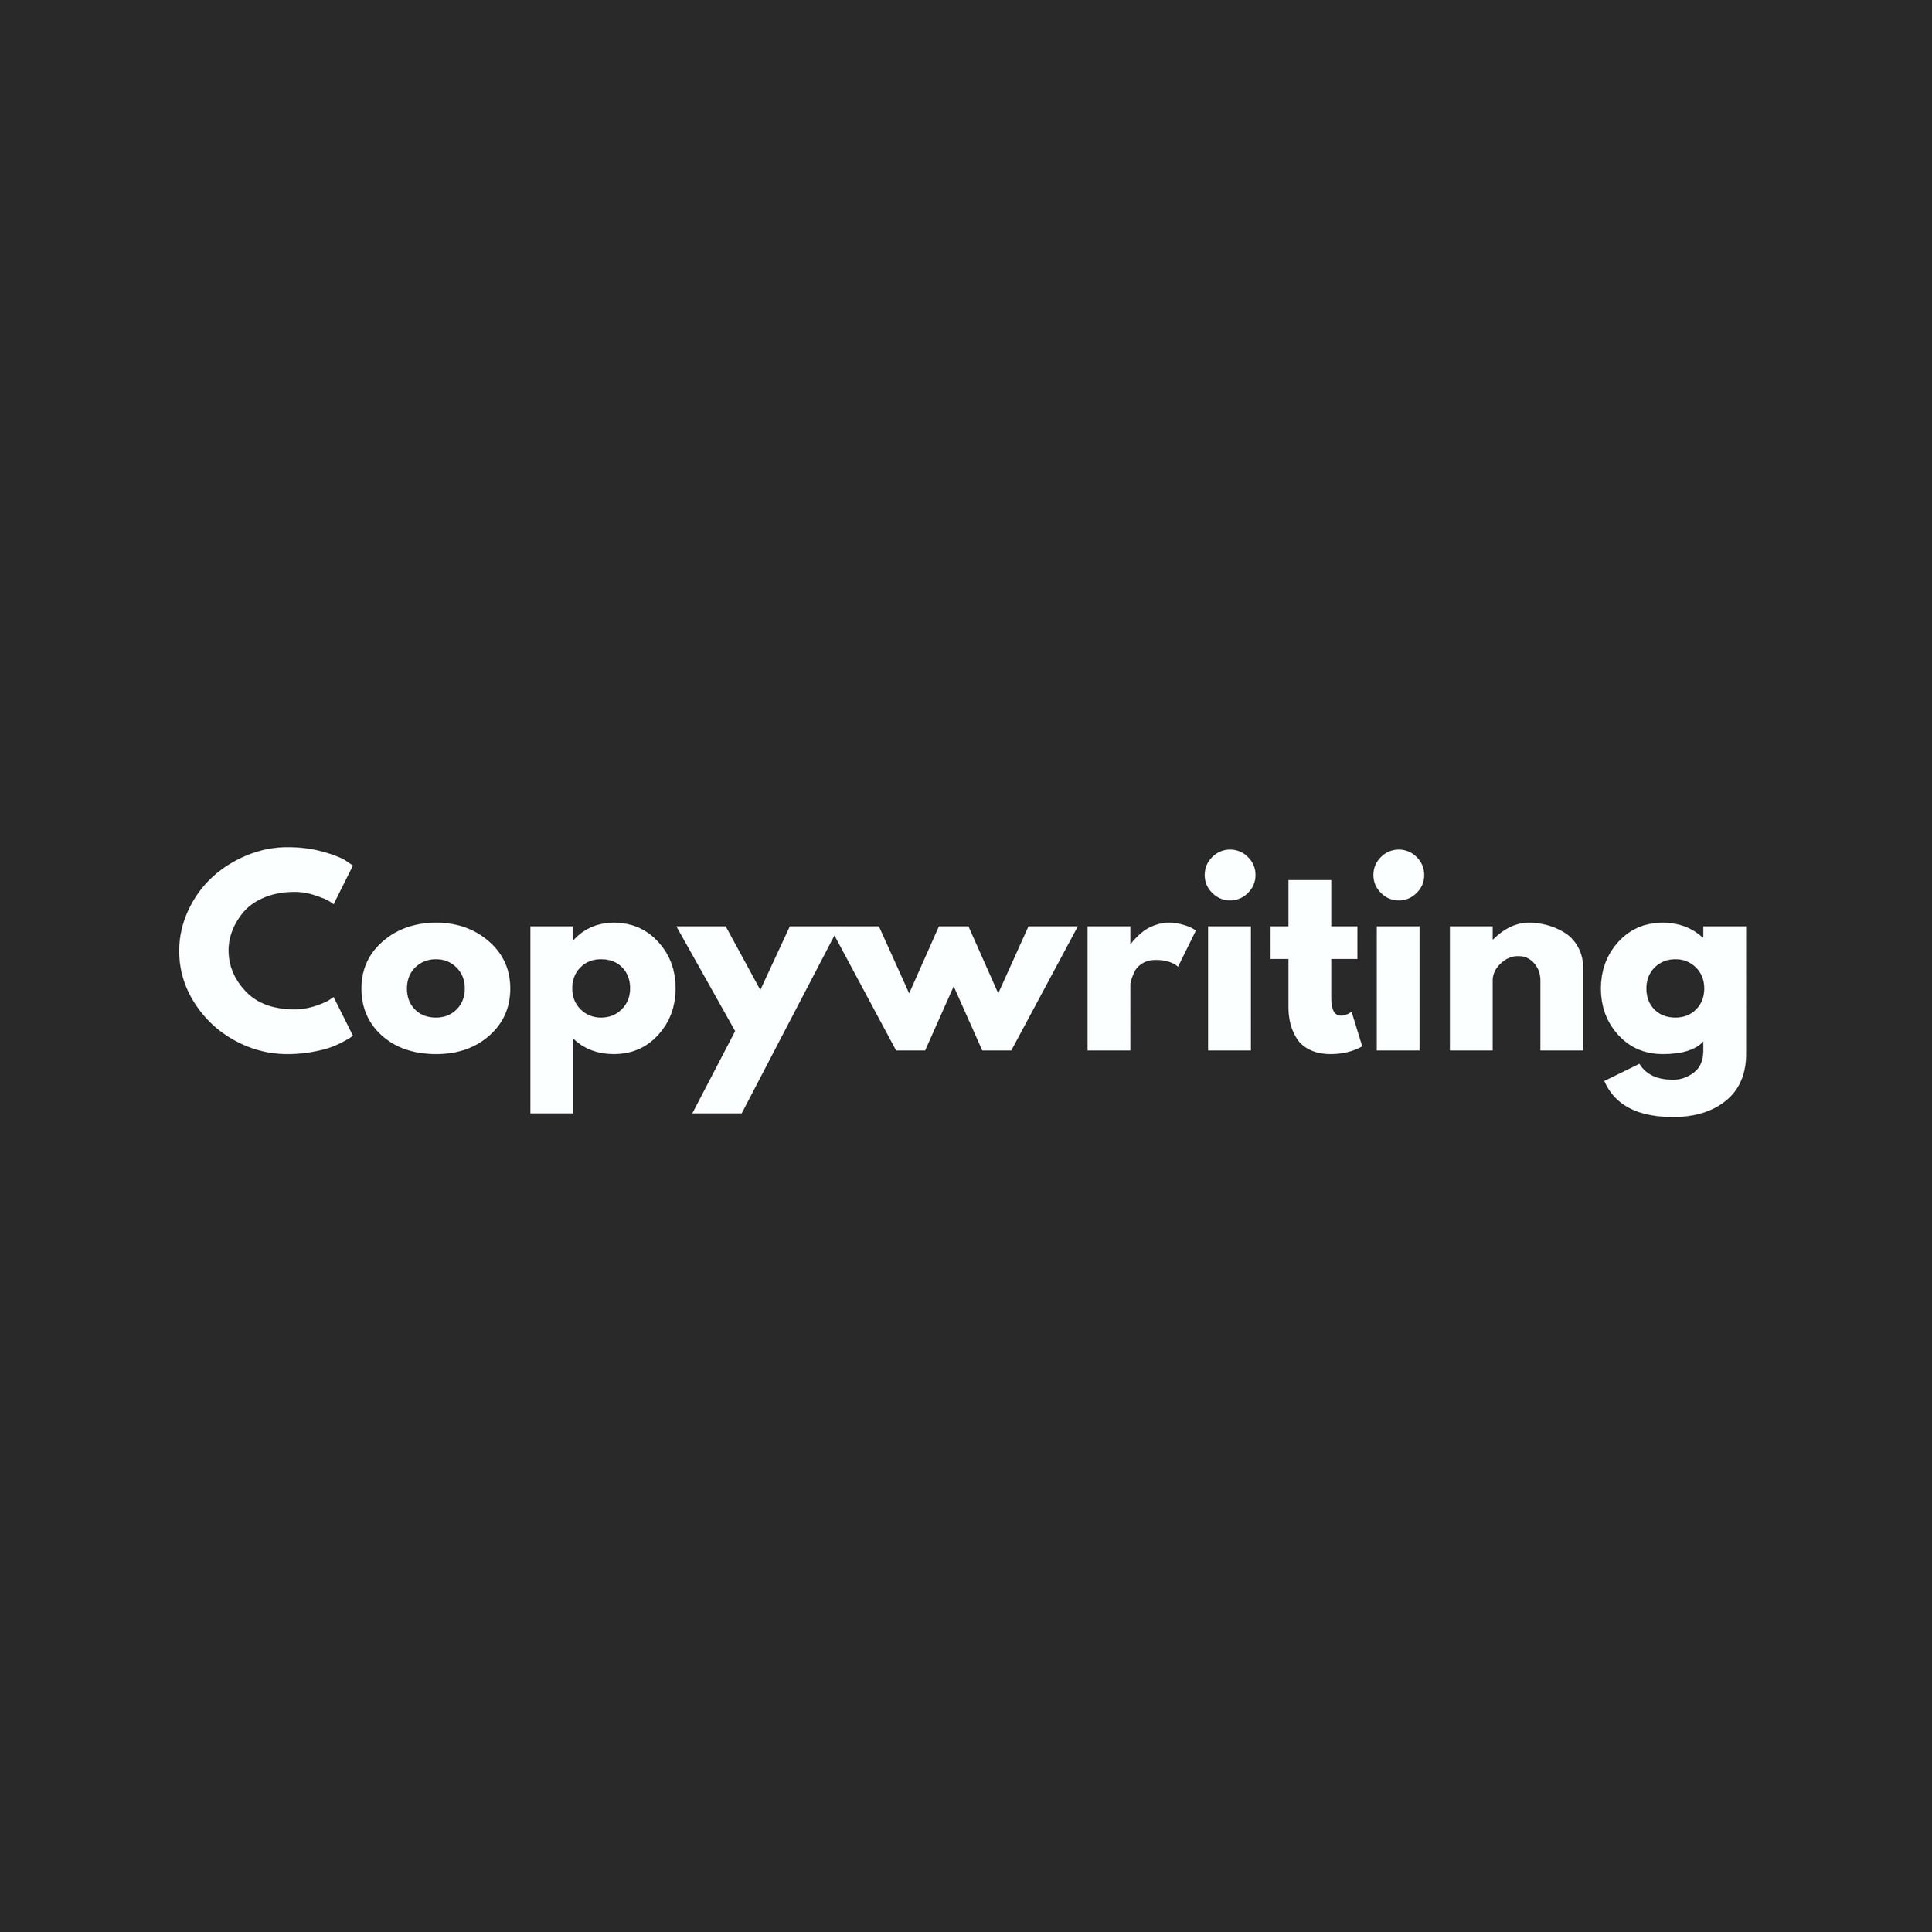 seo-copywriting-agency-services-london-and-bristol-beauxhaus-box-graphic